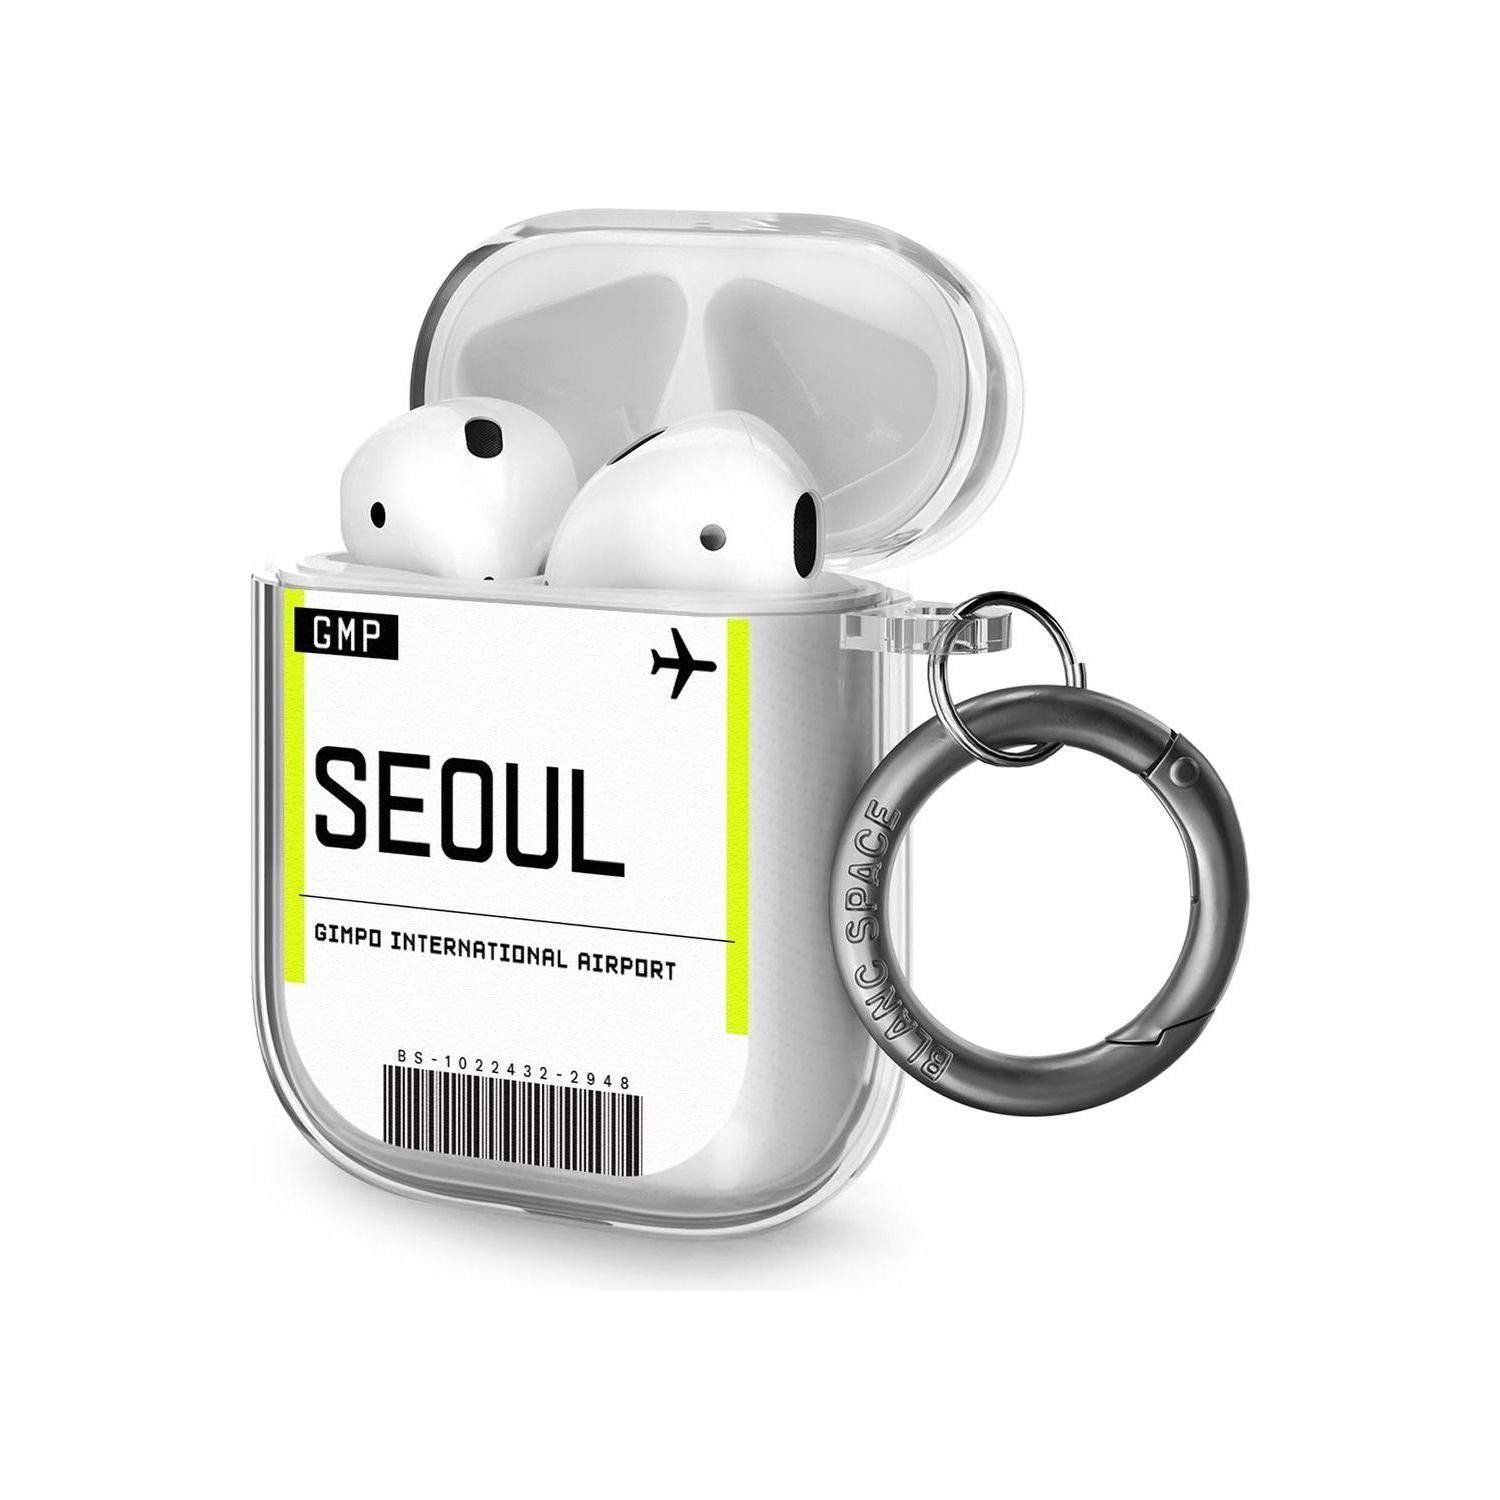 Seoul Boarding Pass Airpods Case (2nd Generation)